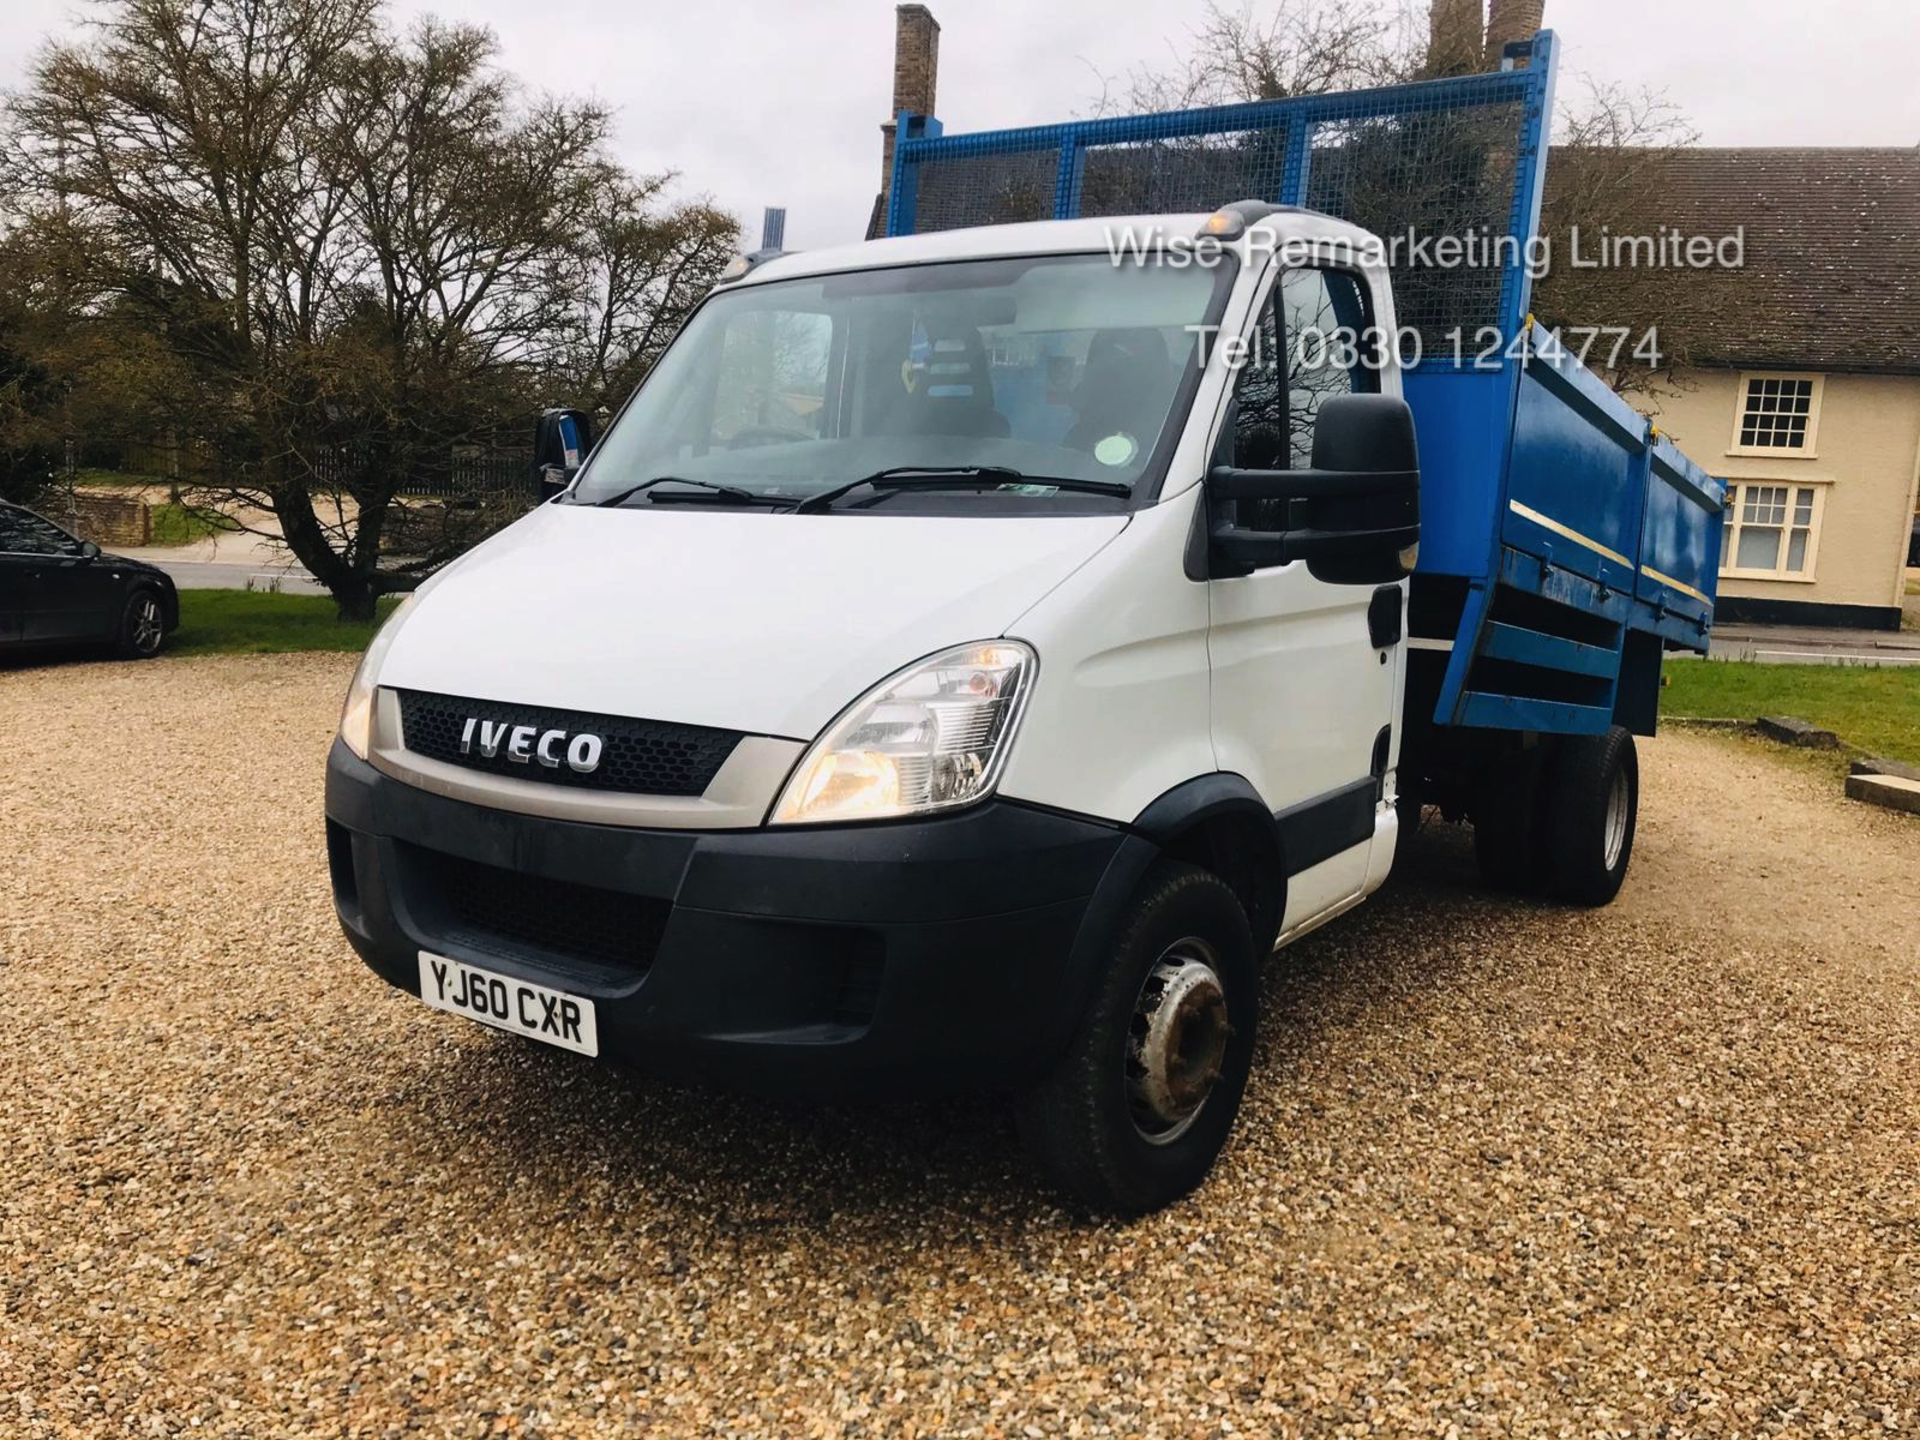 Iveco Daily 3.0 TD 60C18 Tipper (Twin Wheeler) - 6 Speed - 2011 Model - 1 Keeper SAVE 20% NO VAT